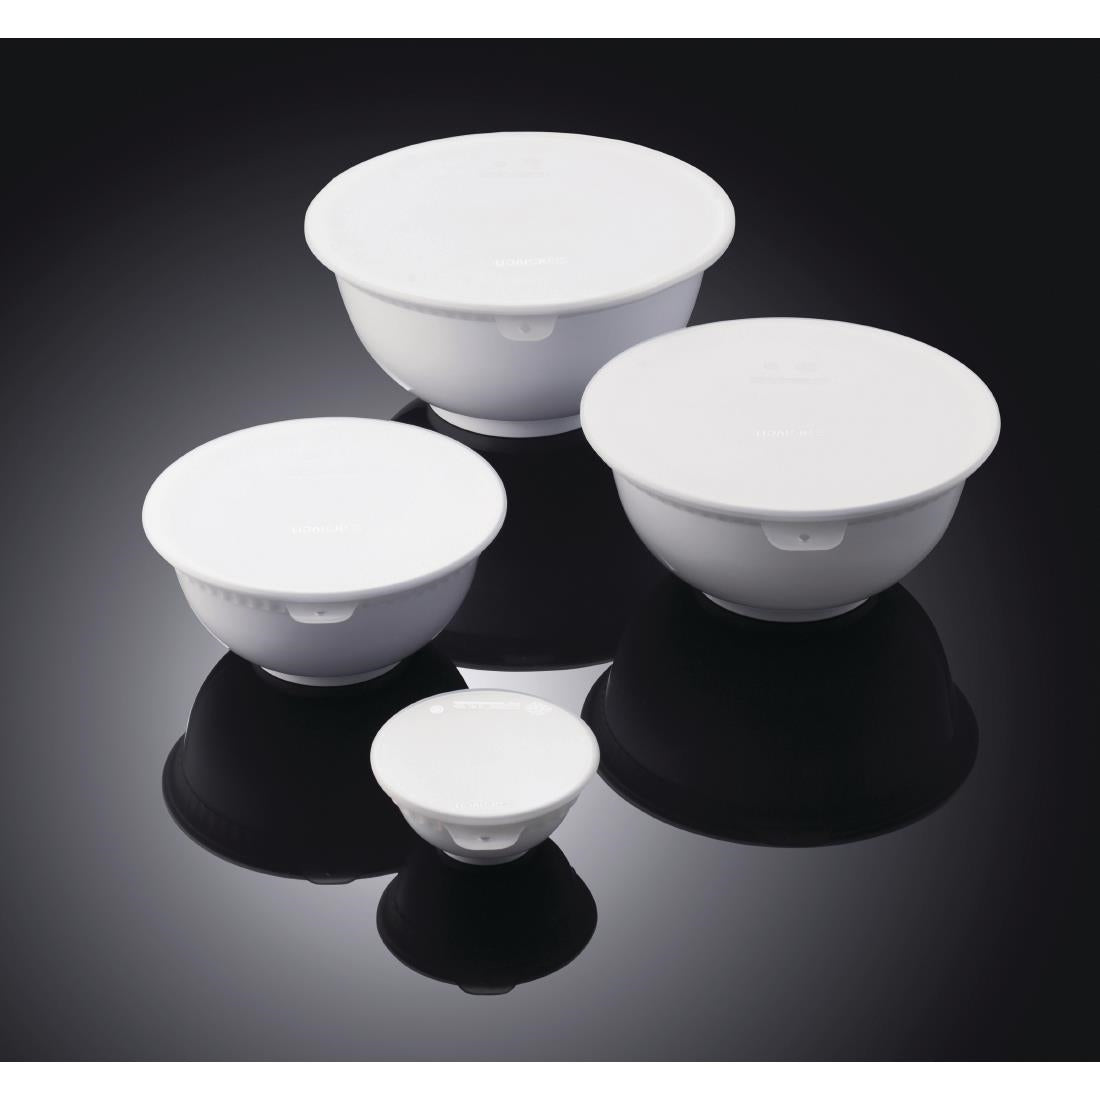 FP930 Araven Round Silicone Lid Clear 133mm JD Catering Equipment Solutions Ltd